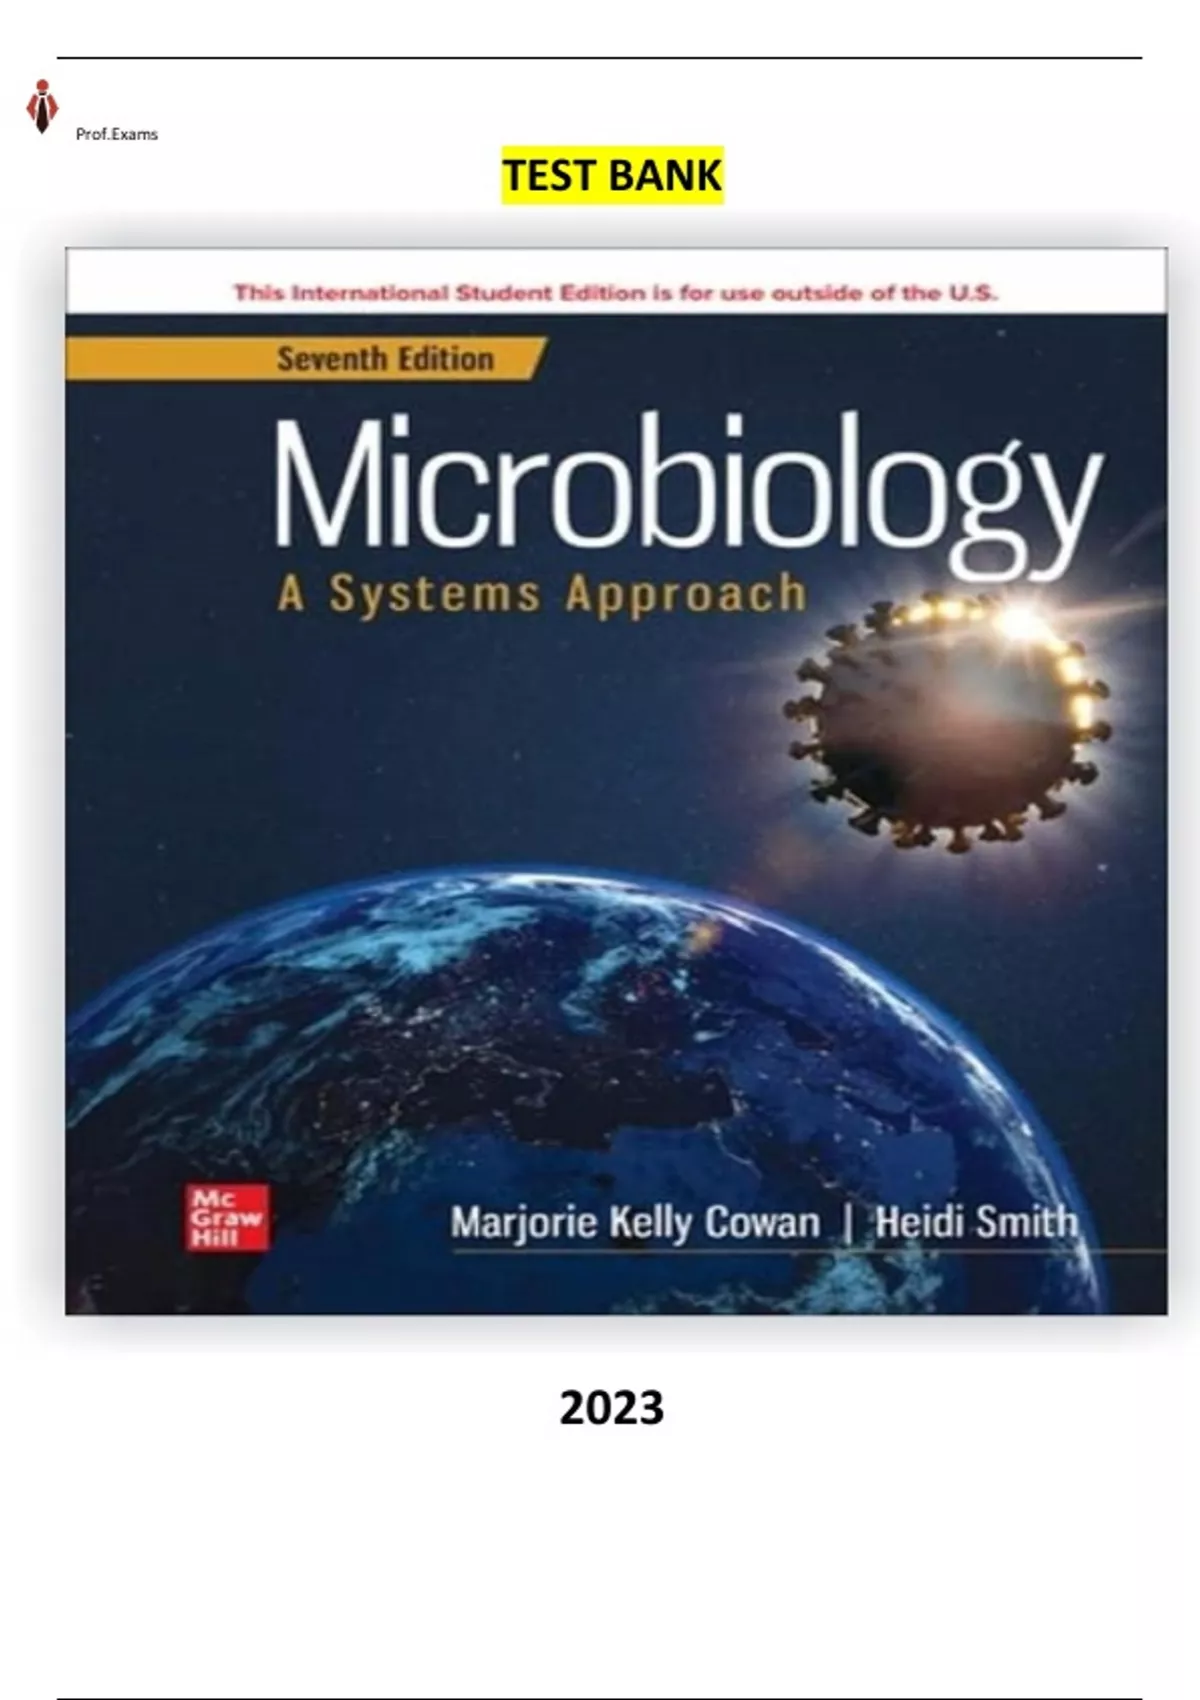 Microbiology A Systems Approach 7th Edition By Marjorie Kelly Cowan Heidi Smith Complete 